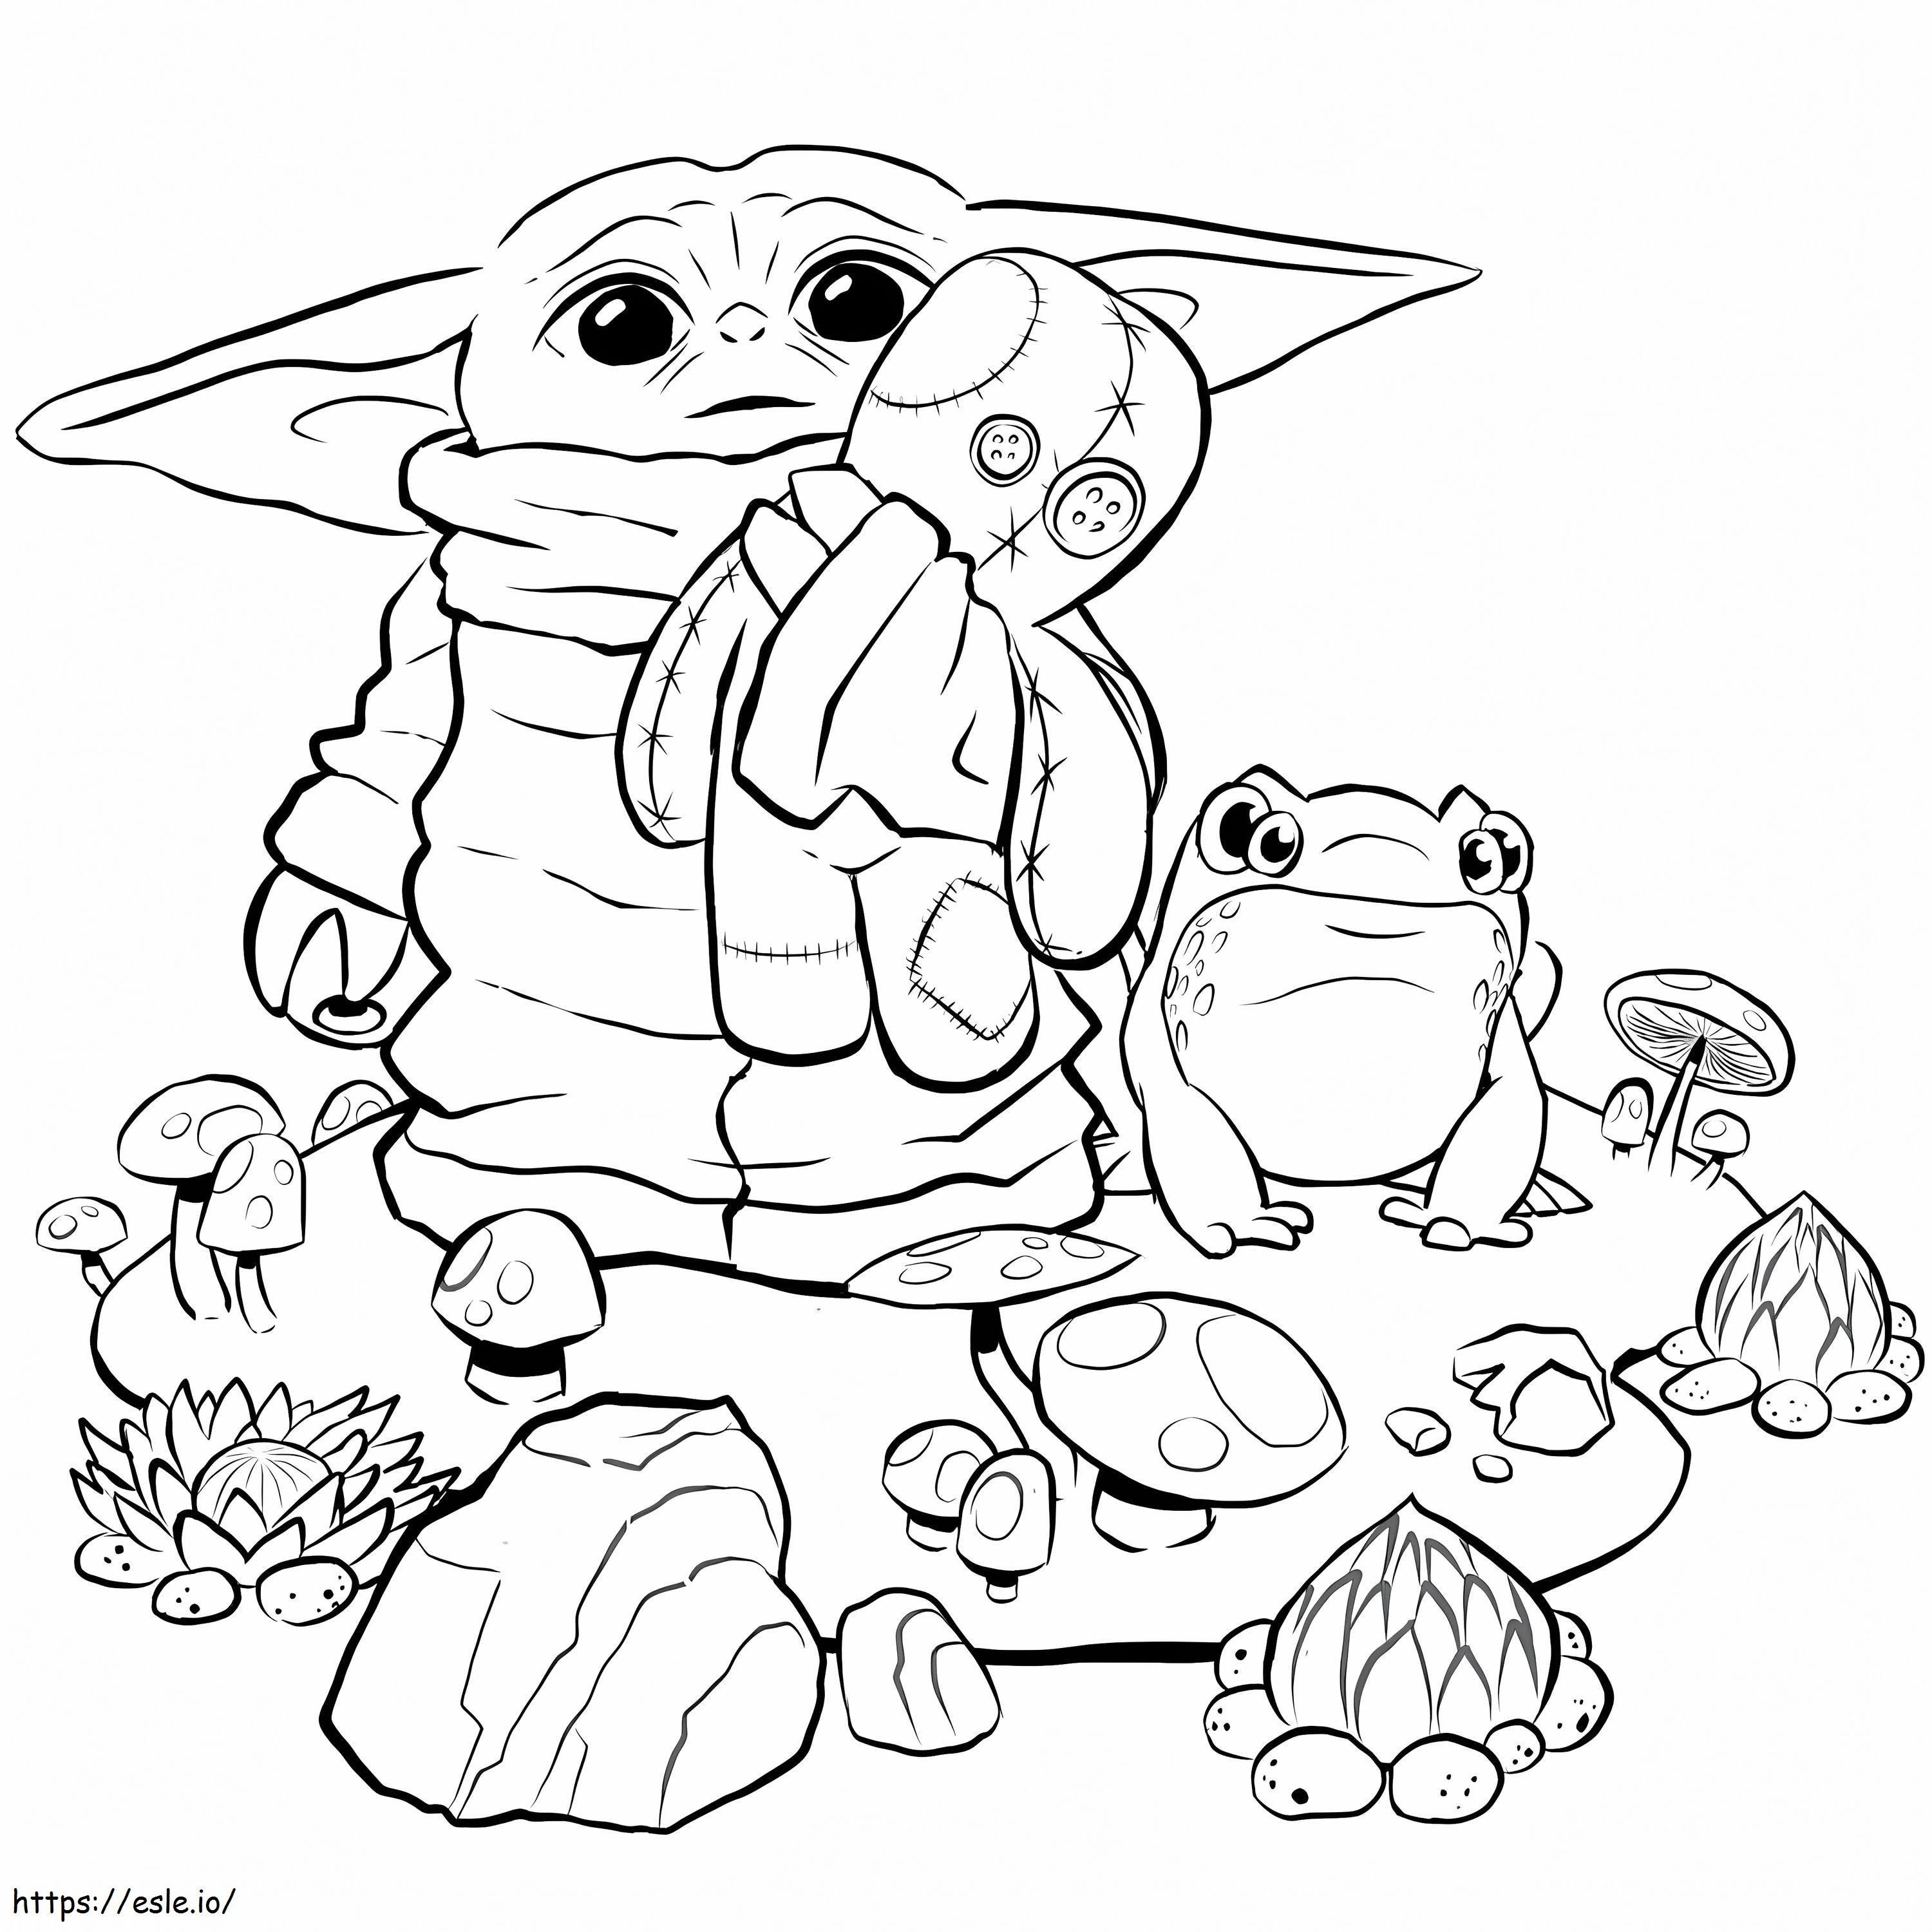 Baby Yoda Holding Frog Toy coloring page